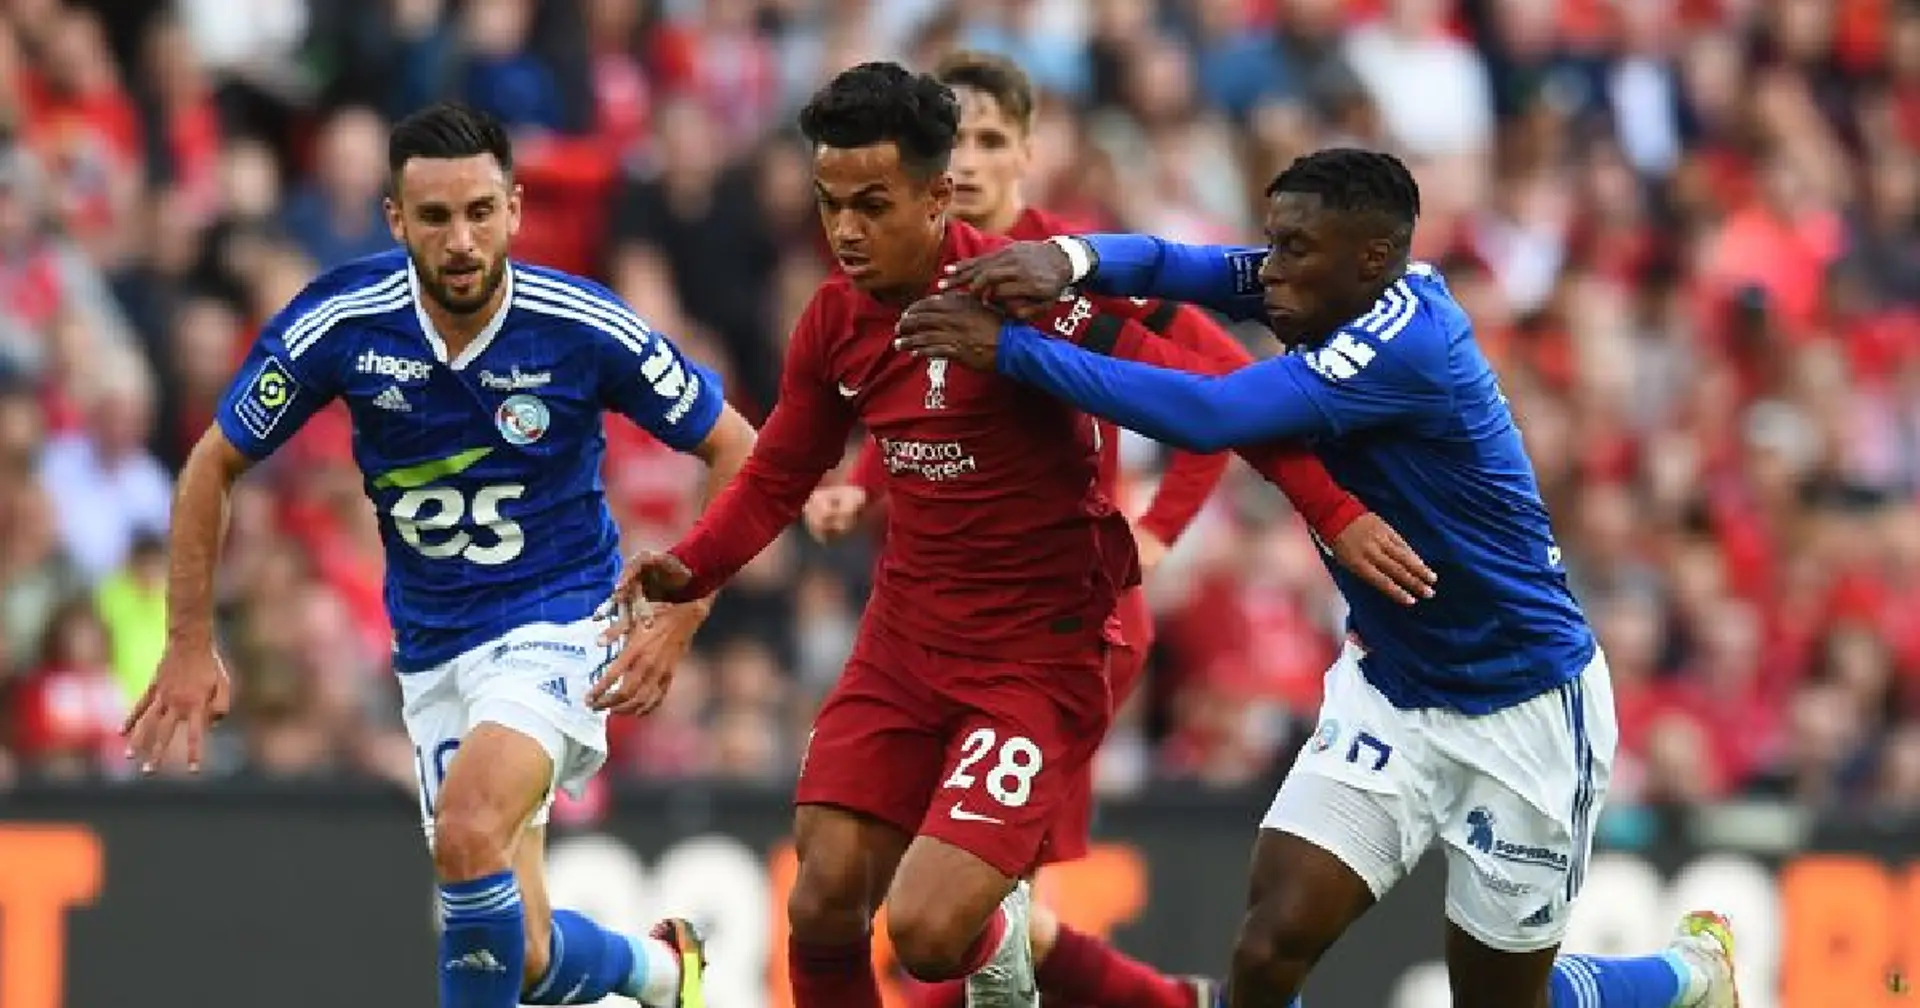 Carvalho 7, Morton 6: Rating Liverpool players in Strasbourg defeat